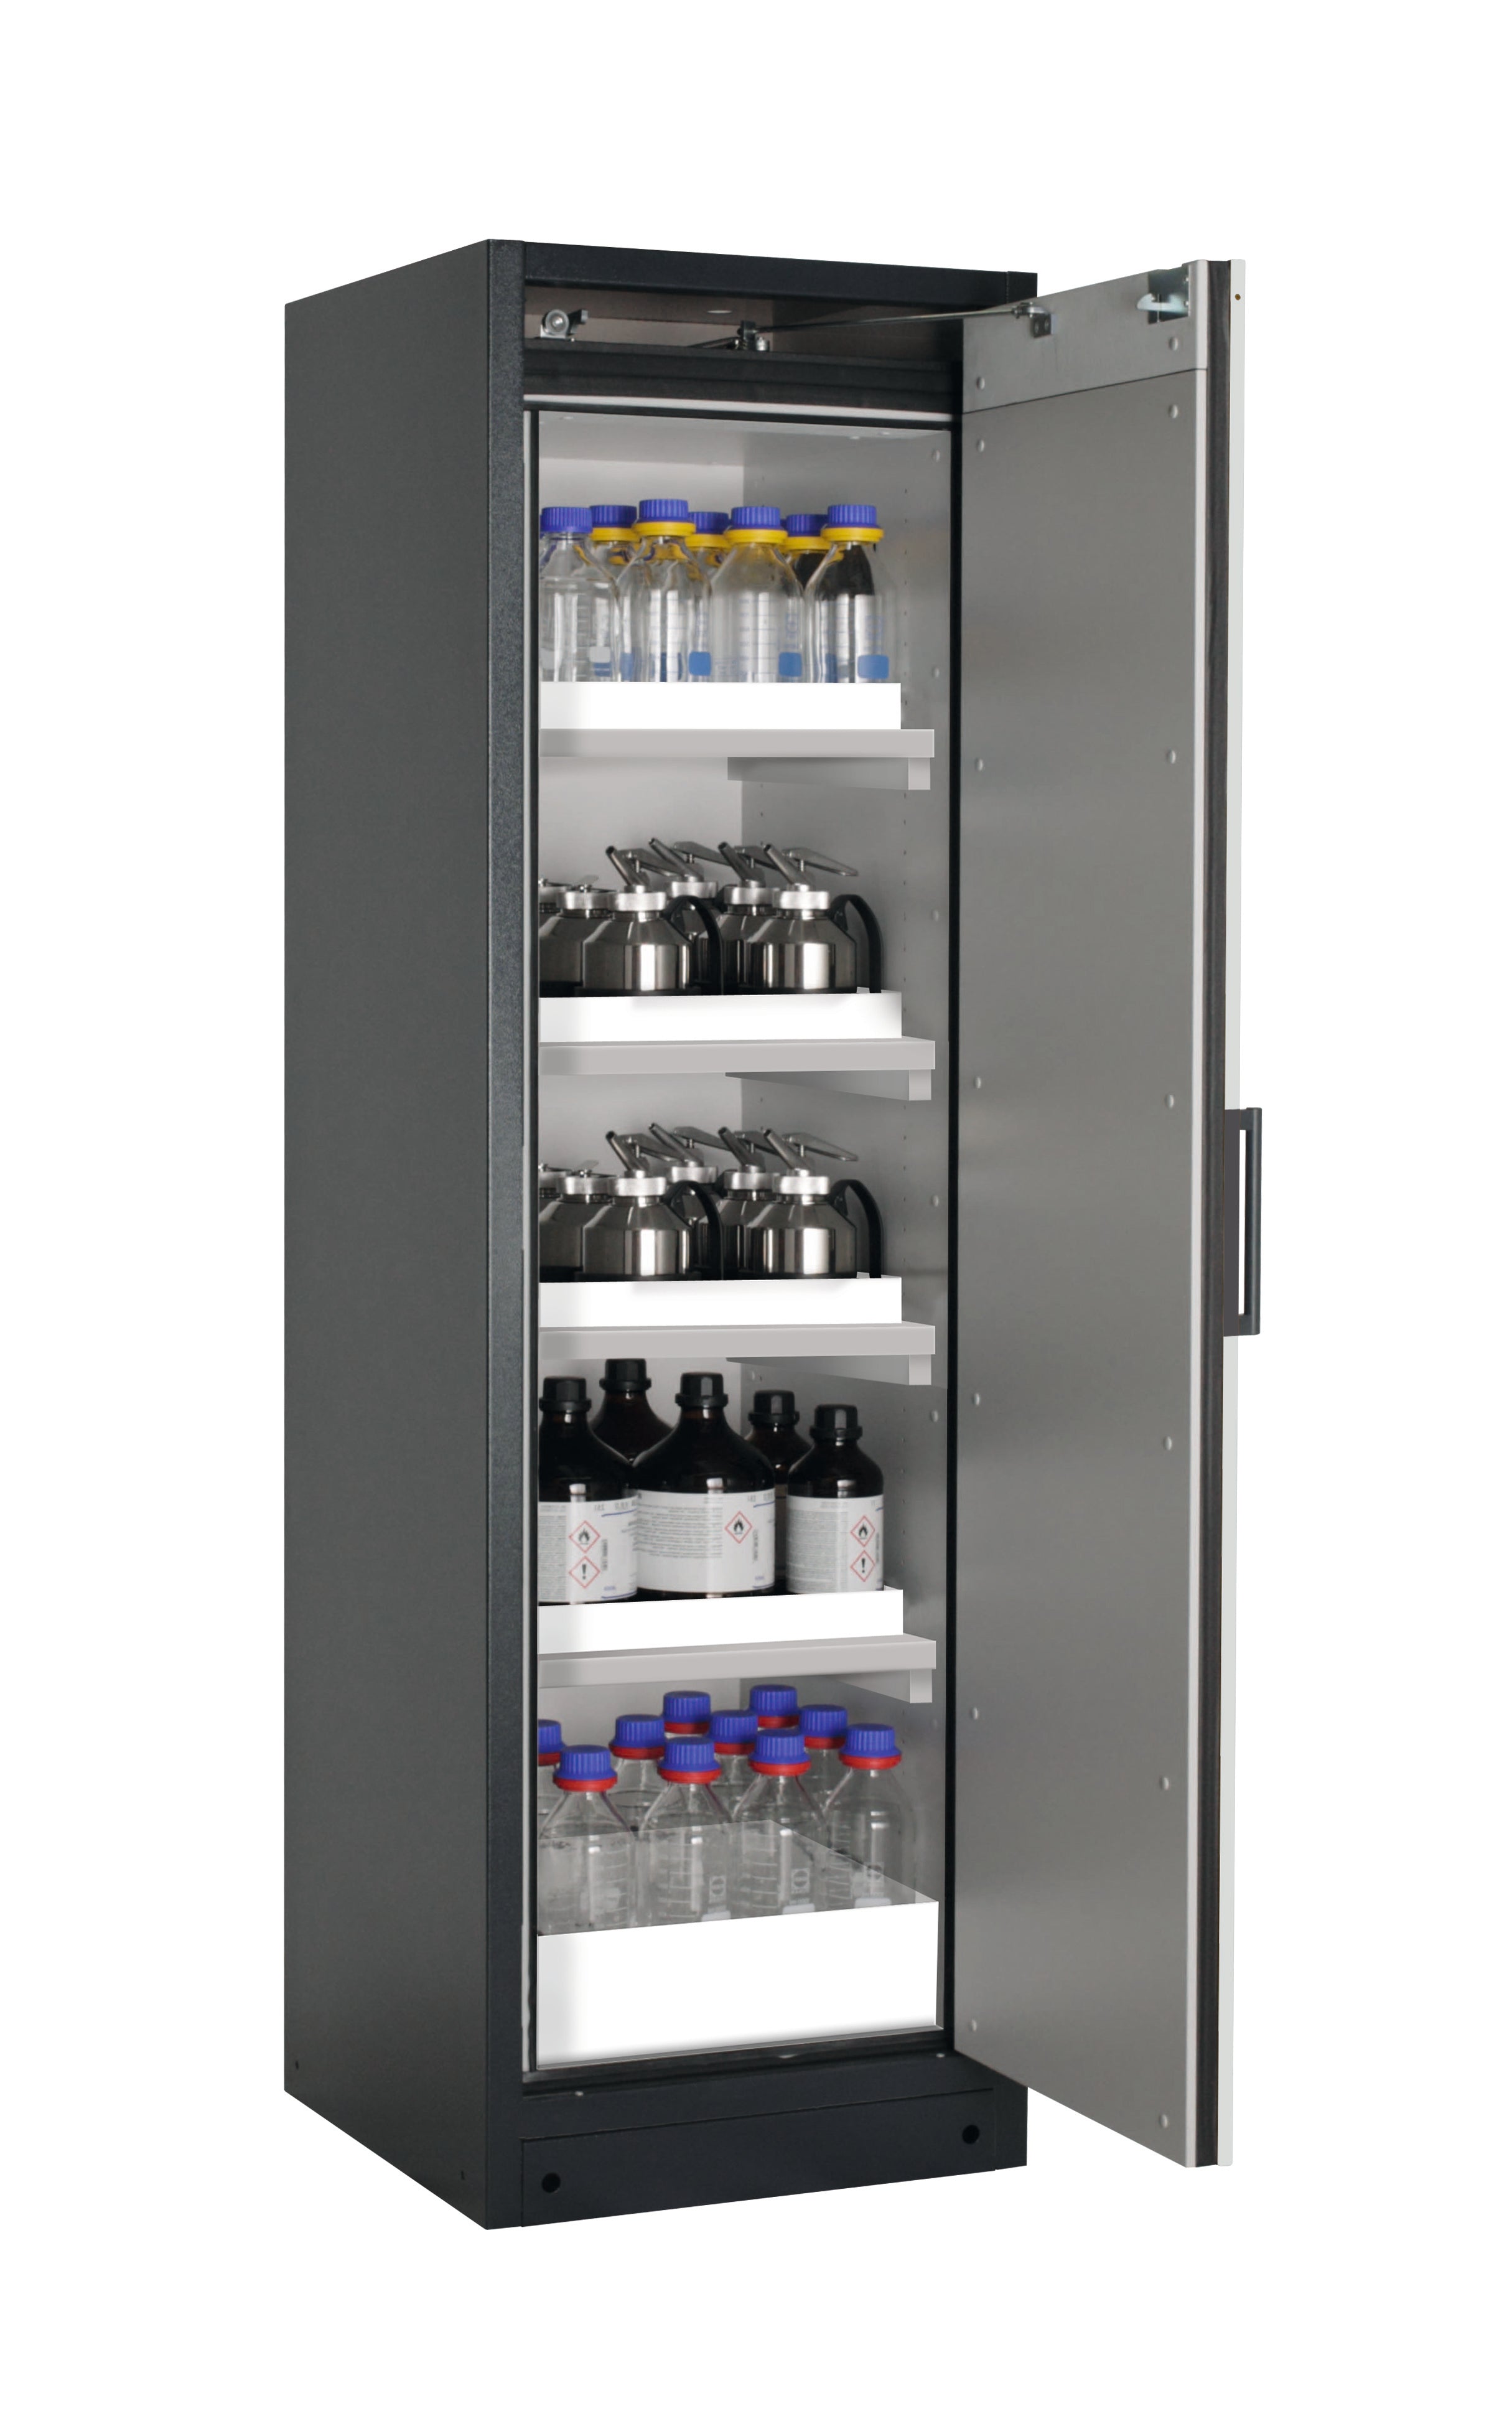 Type 90 safety storage cabinet Q-CLASSIC-90 model Q90.195.060.R in light grey RAL 7035 with 4x tray shelf (standard) (polypropylene),